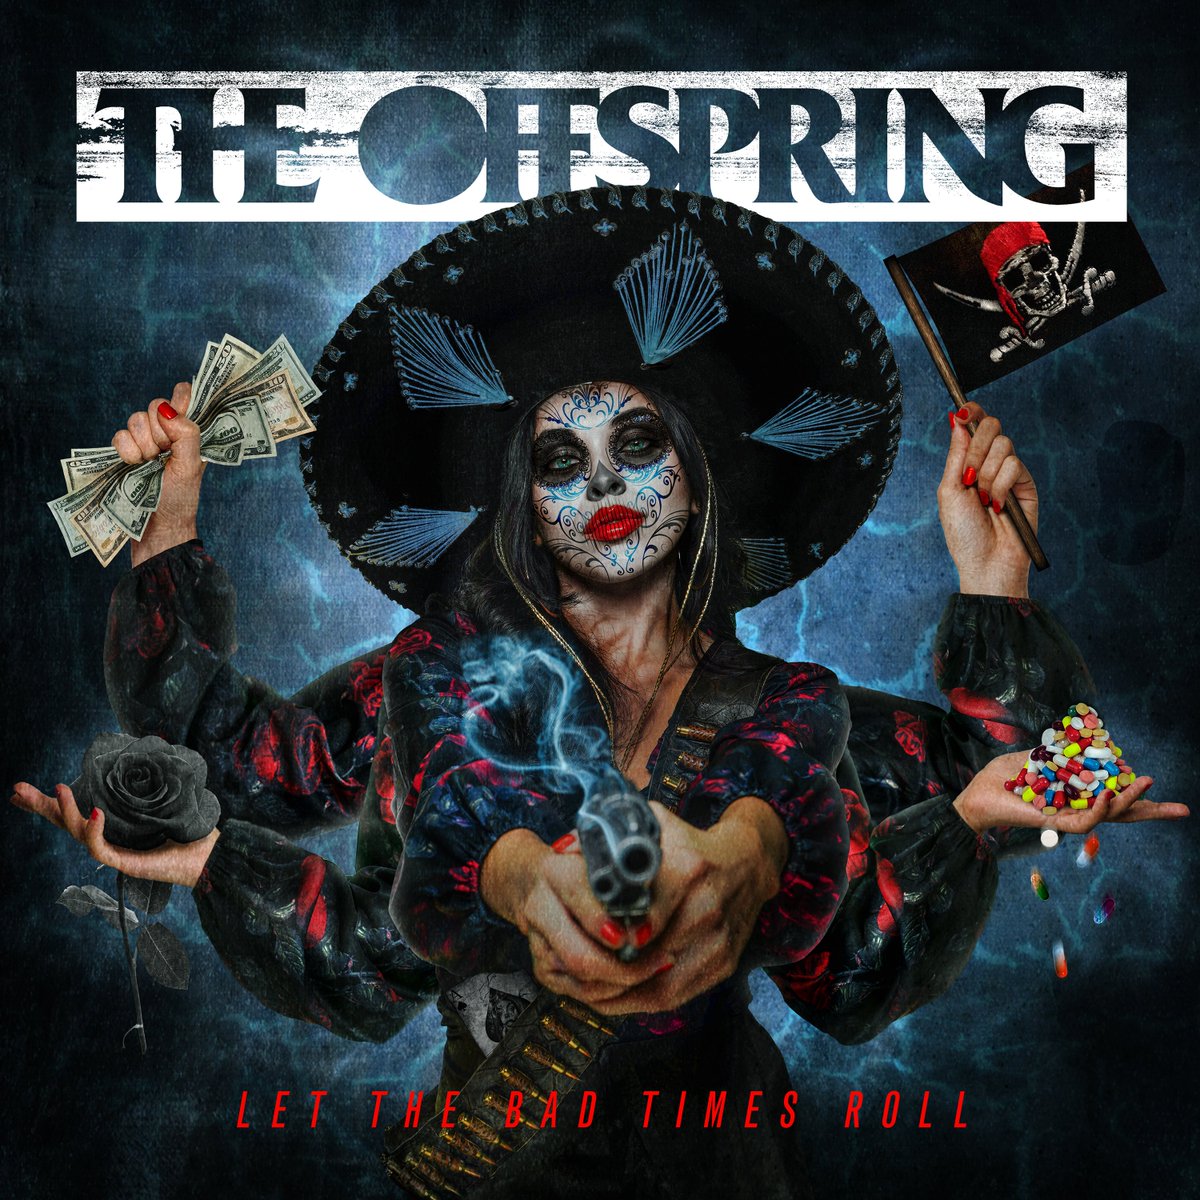 Our tenth studio album 'Let The Bad Times Roll' will be available everywhere on April 16, 2021! That's right, we have a brand new album coming out this year! Pre-Save LET THE BAD TIMES ROLL now at found.ee/OffspringBadTi… 🏴‍☠️ ☠️